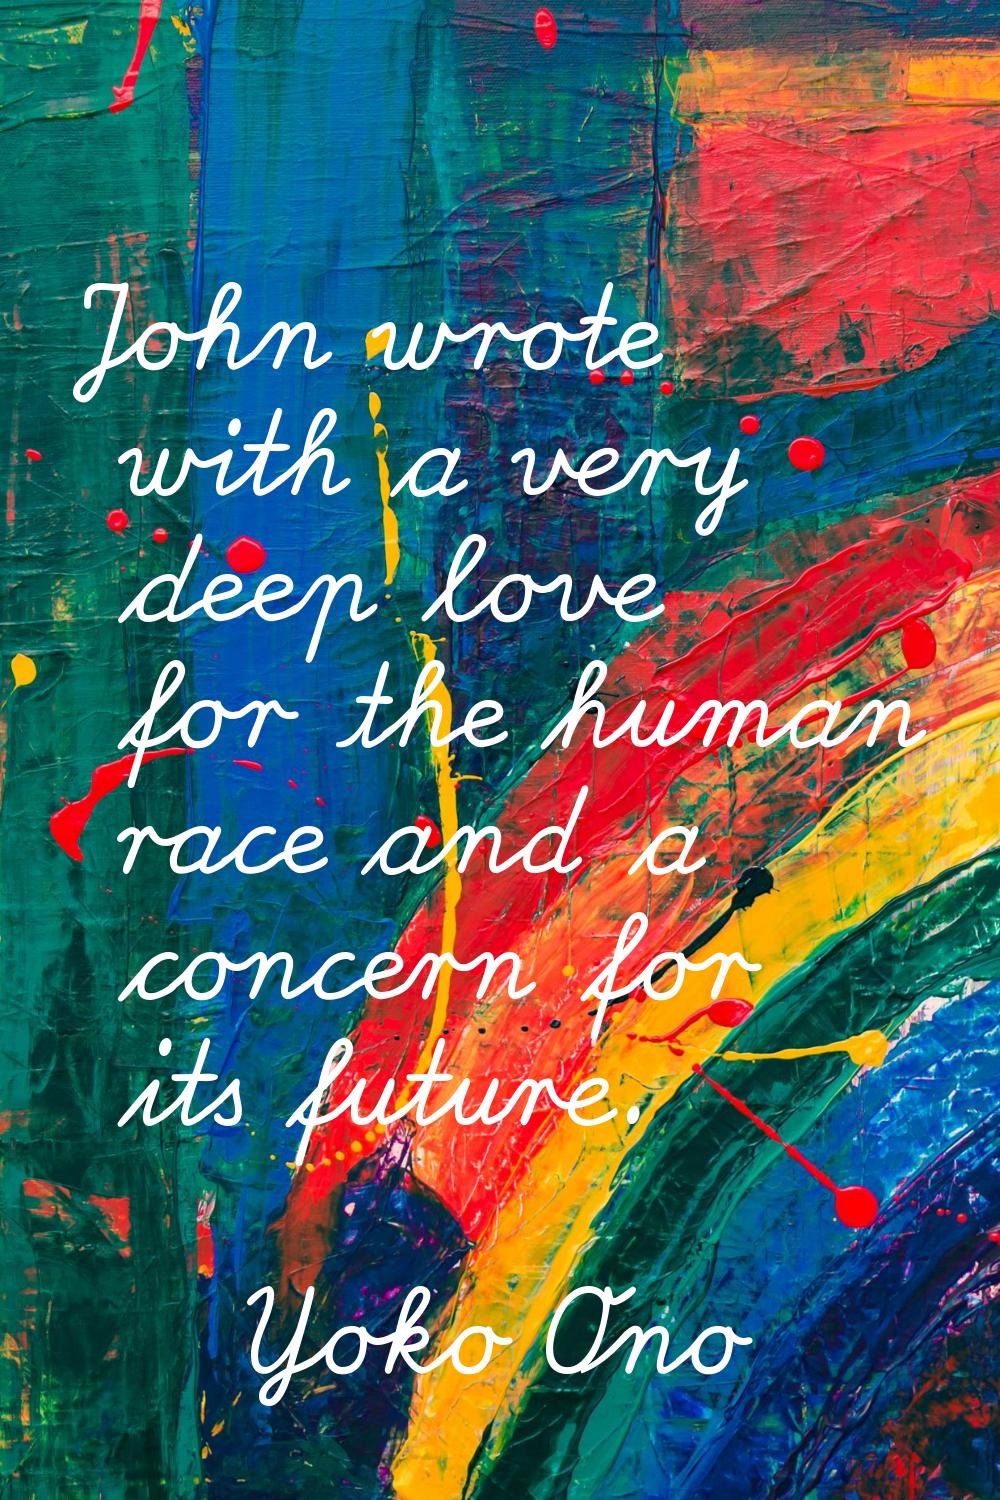 John wrote with a very deep love for the human race and a concern for its future.